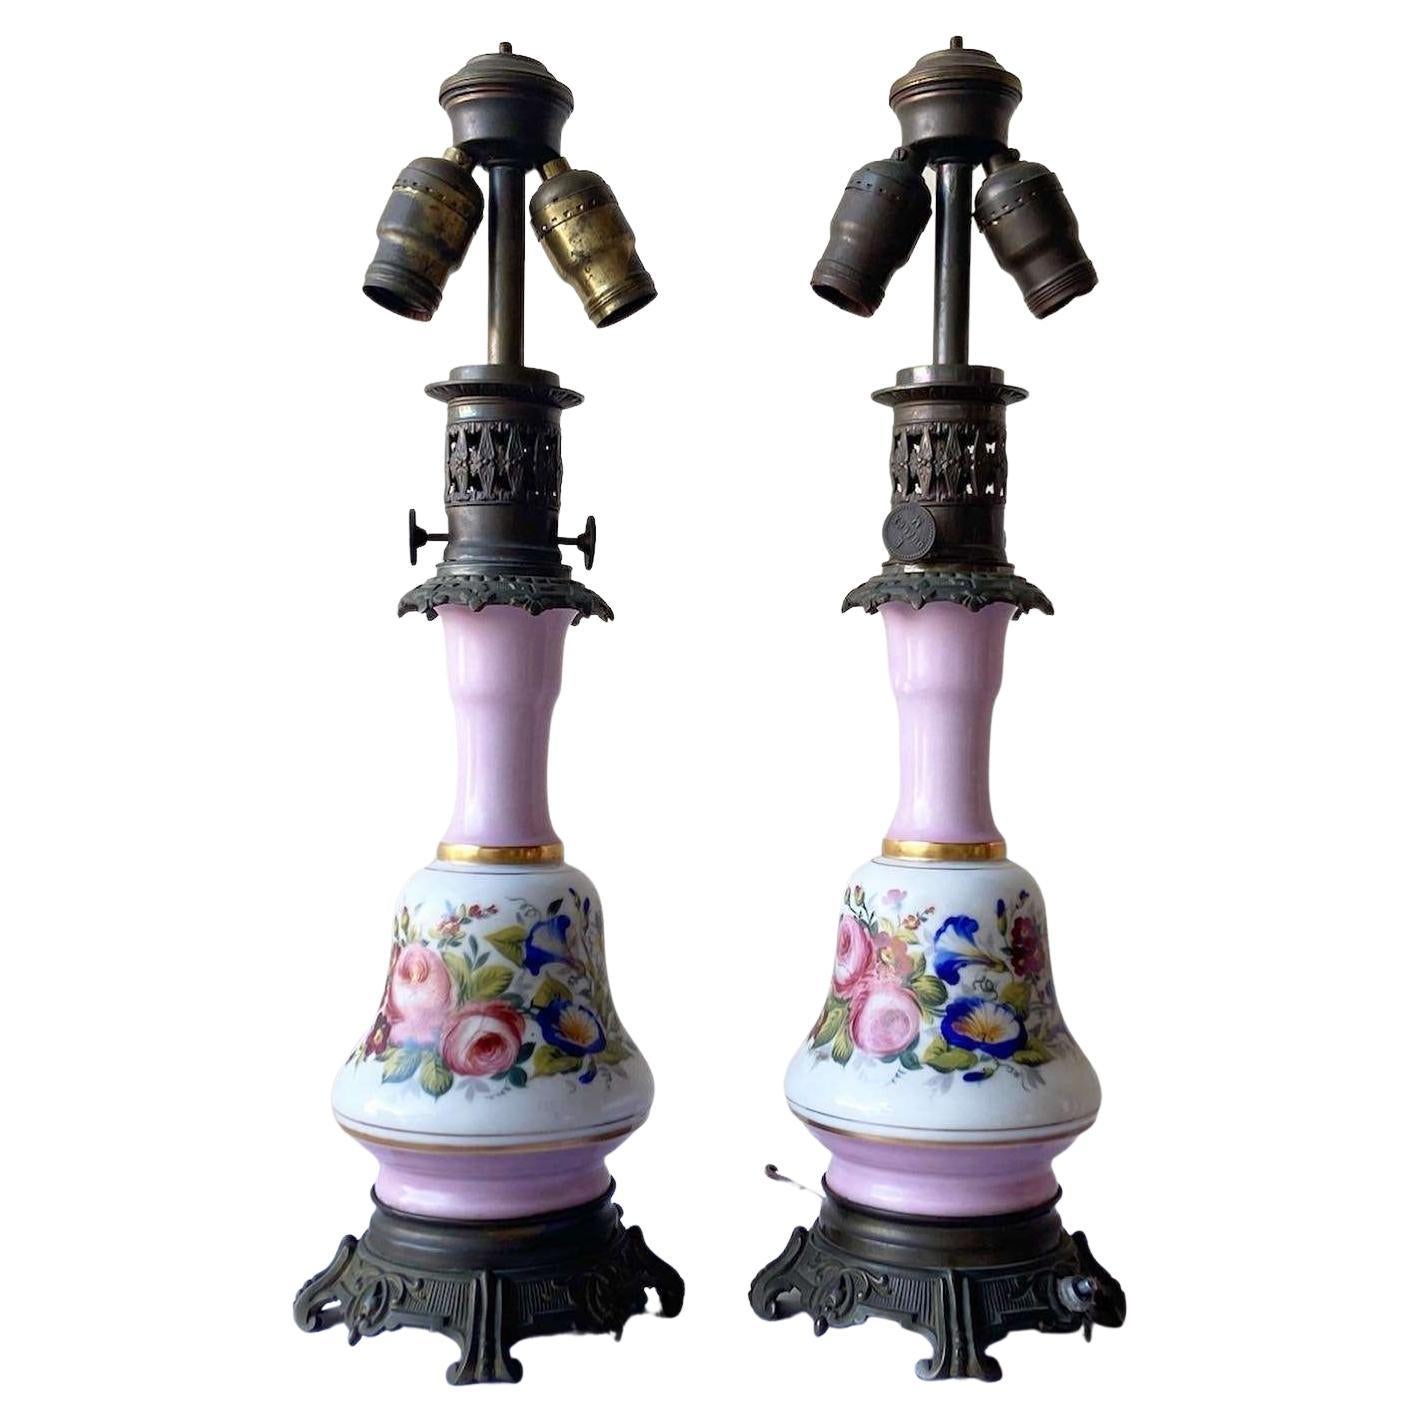 Vintage French Pink and White Porcelain and Brass Table Lamps - a Pair